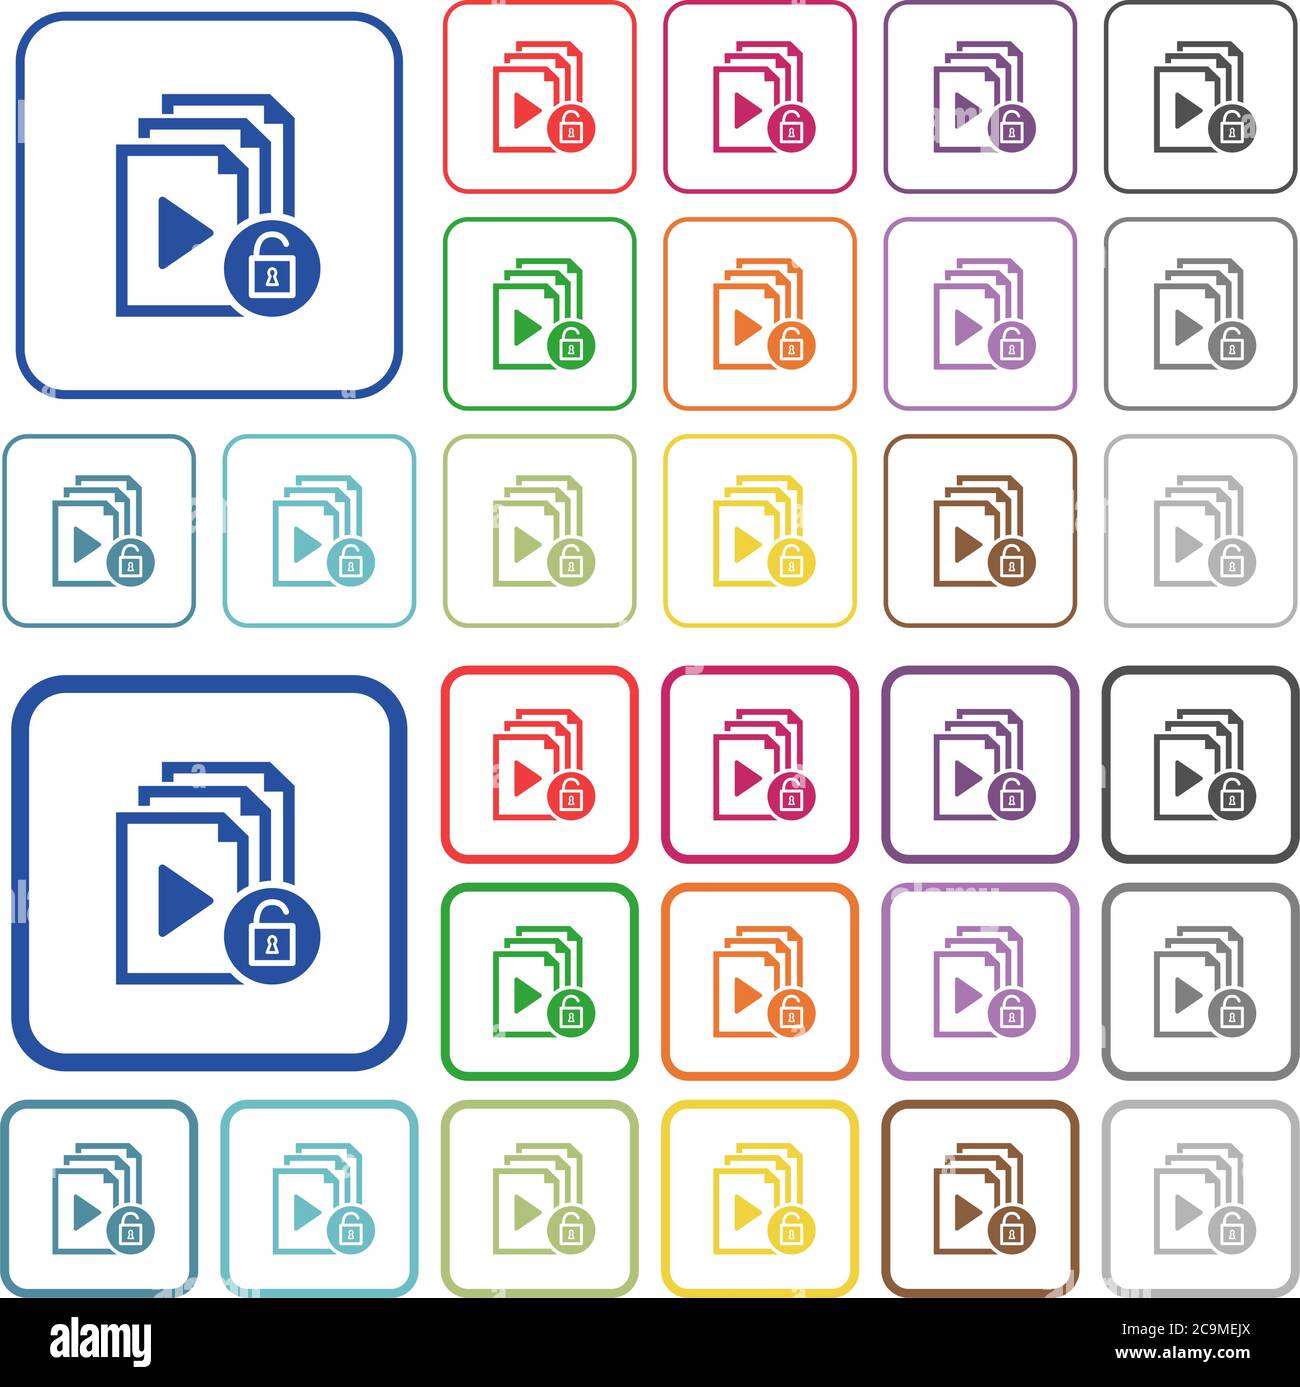 Unlock playlist color flat icons in rounded square frames. Thin and thick versions included. Stock Vector